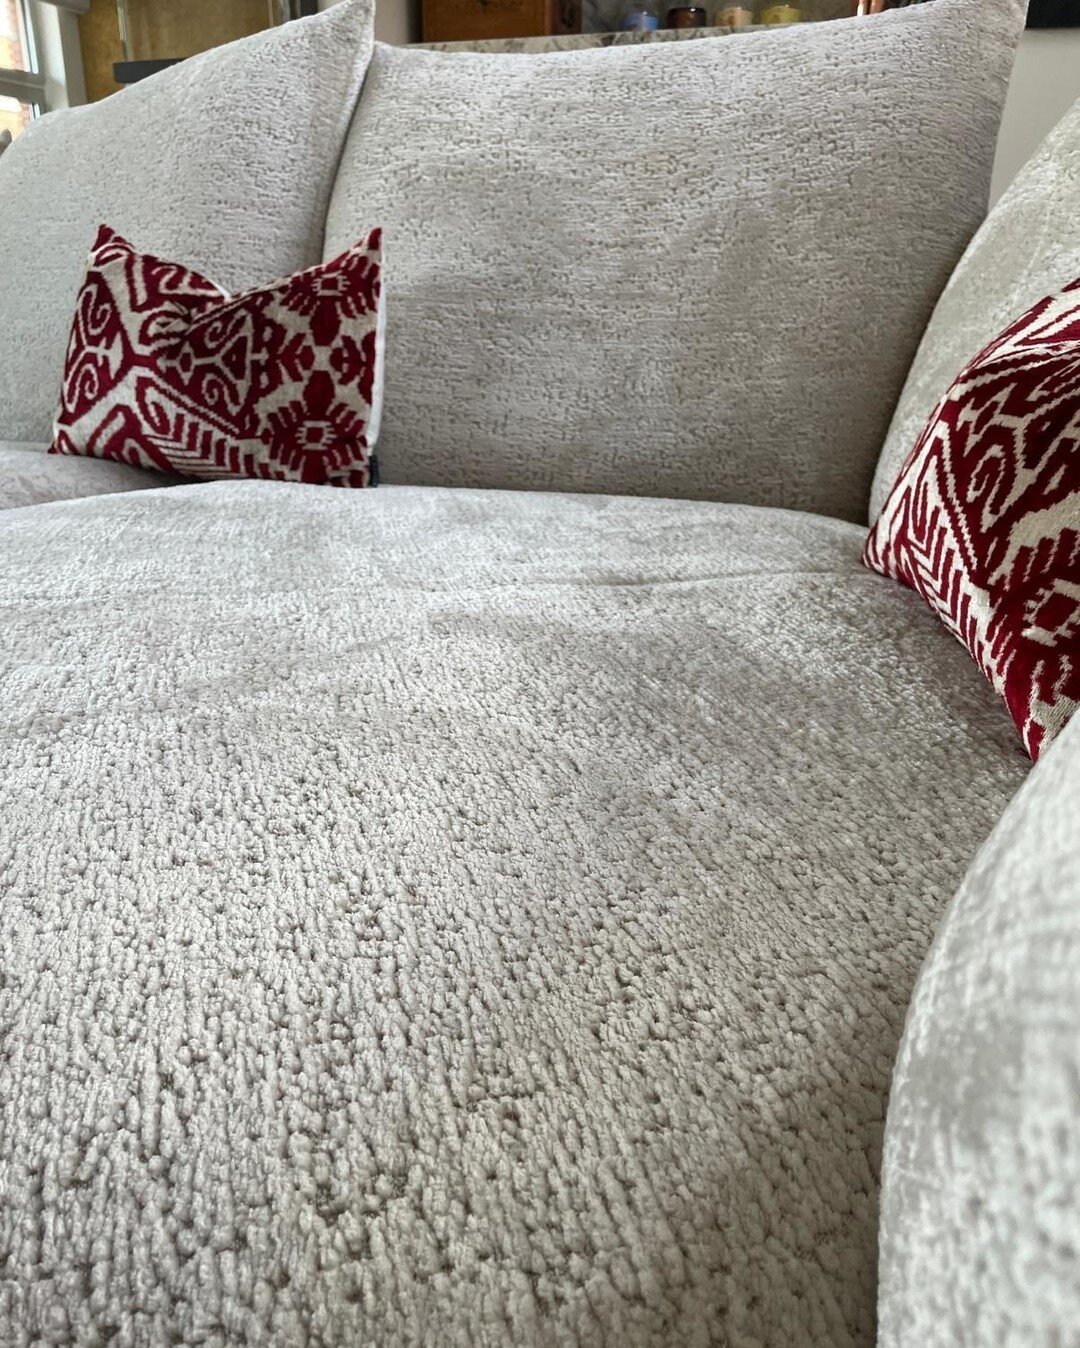 Love the @edra.official sofa in our Canal House project. Detail shot of the beautiful textured fabric. The @rug_society rug has just arrived and so excited to see the living space complete!⠀⠀⠀⠀⠀⠀⠀⠀⠀
.⠀⠀⠀⠀⠀⠀⠀⠀⠀
.⠀⠀⠀⠀⠀⠀⠀⠀⠀
.⠀⠀⠀⠀⠀⠀⠀⠀⠀
#yohanmayinteriors